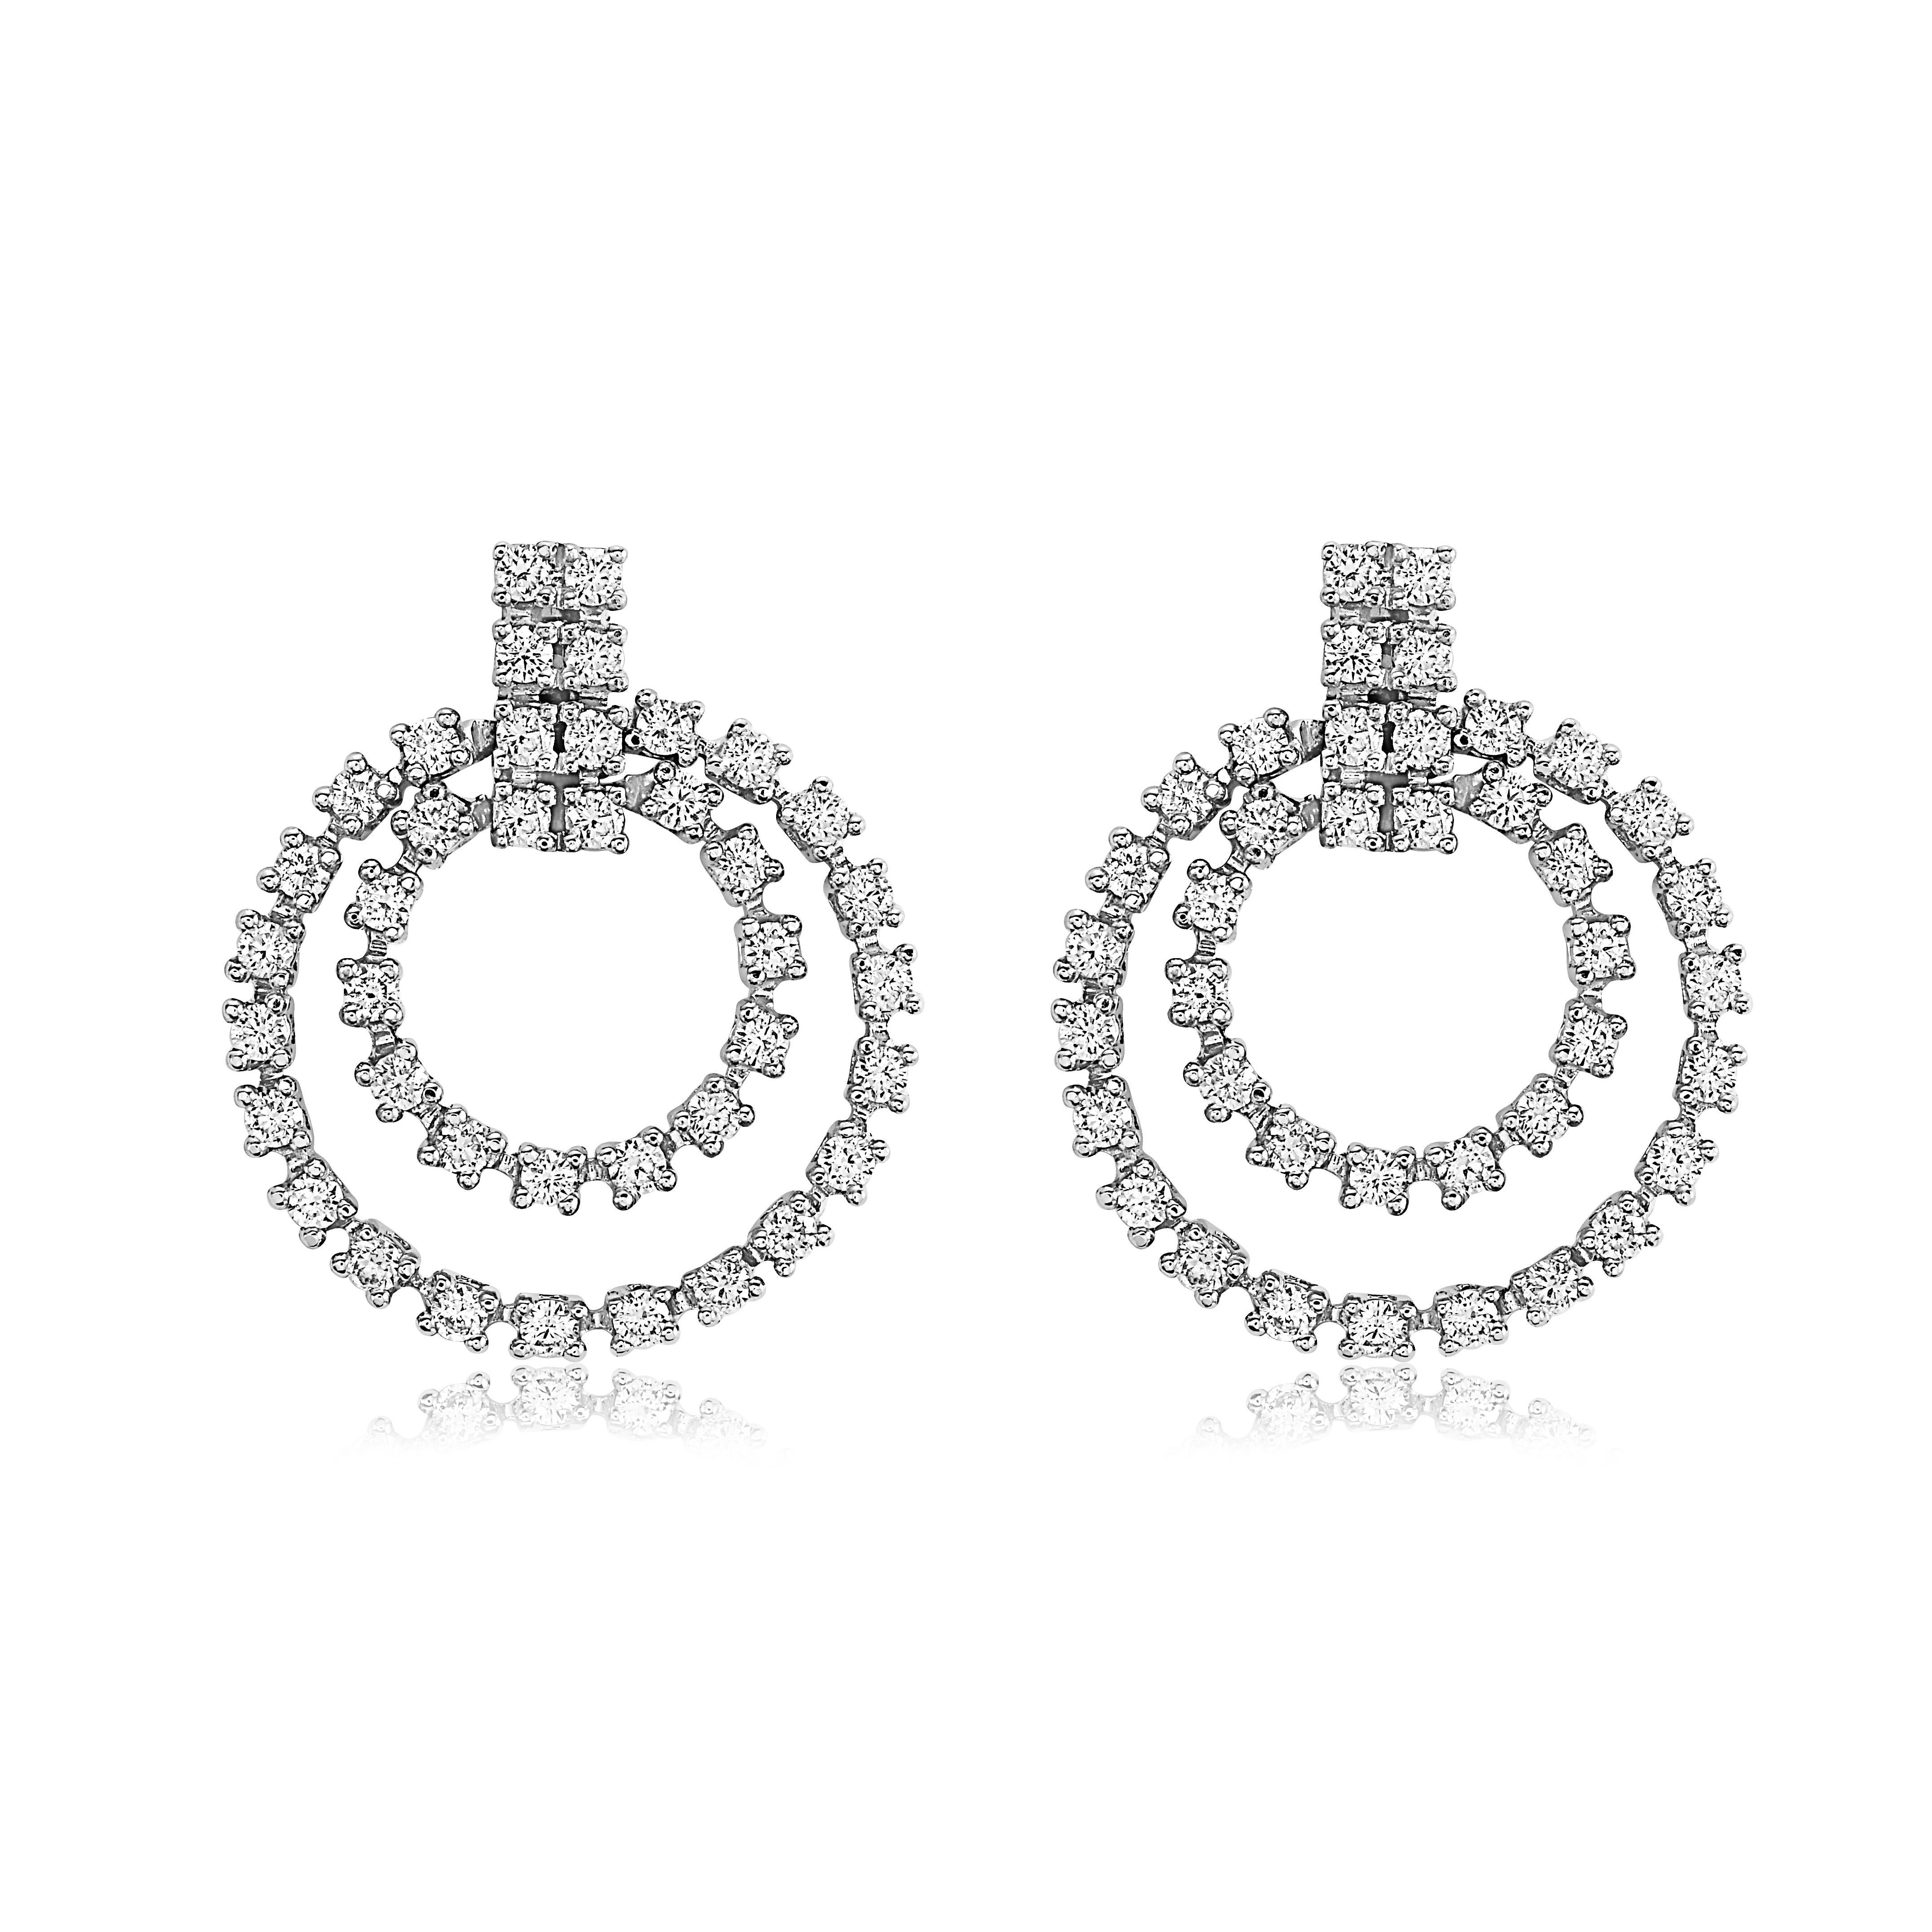 Stunning Krieger Diamond Earrings in 18K White Gold and 2.14 carats of diamonds. These genuine Krieger Diamonds earrings are as timeless as they are beautiful. They elevate any look with the diamonds and gold that sparkle. 

2.14 ct
6.73 dwt

MSRP